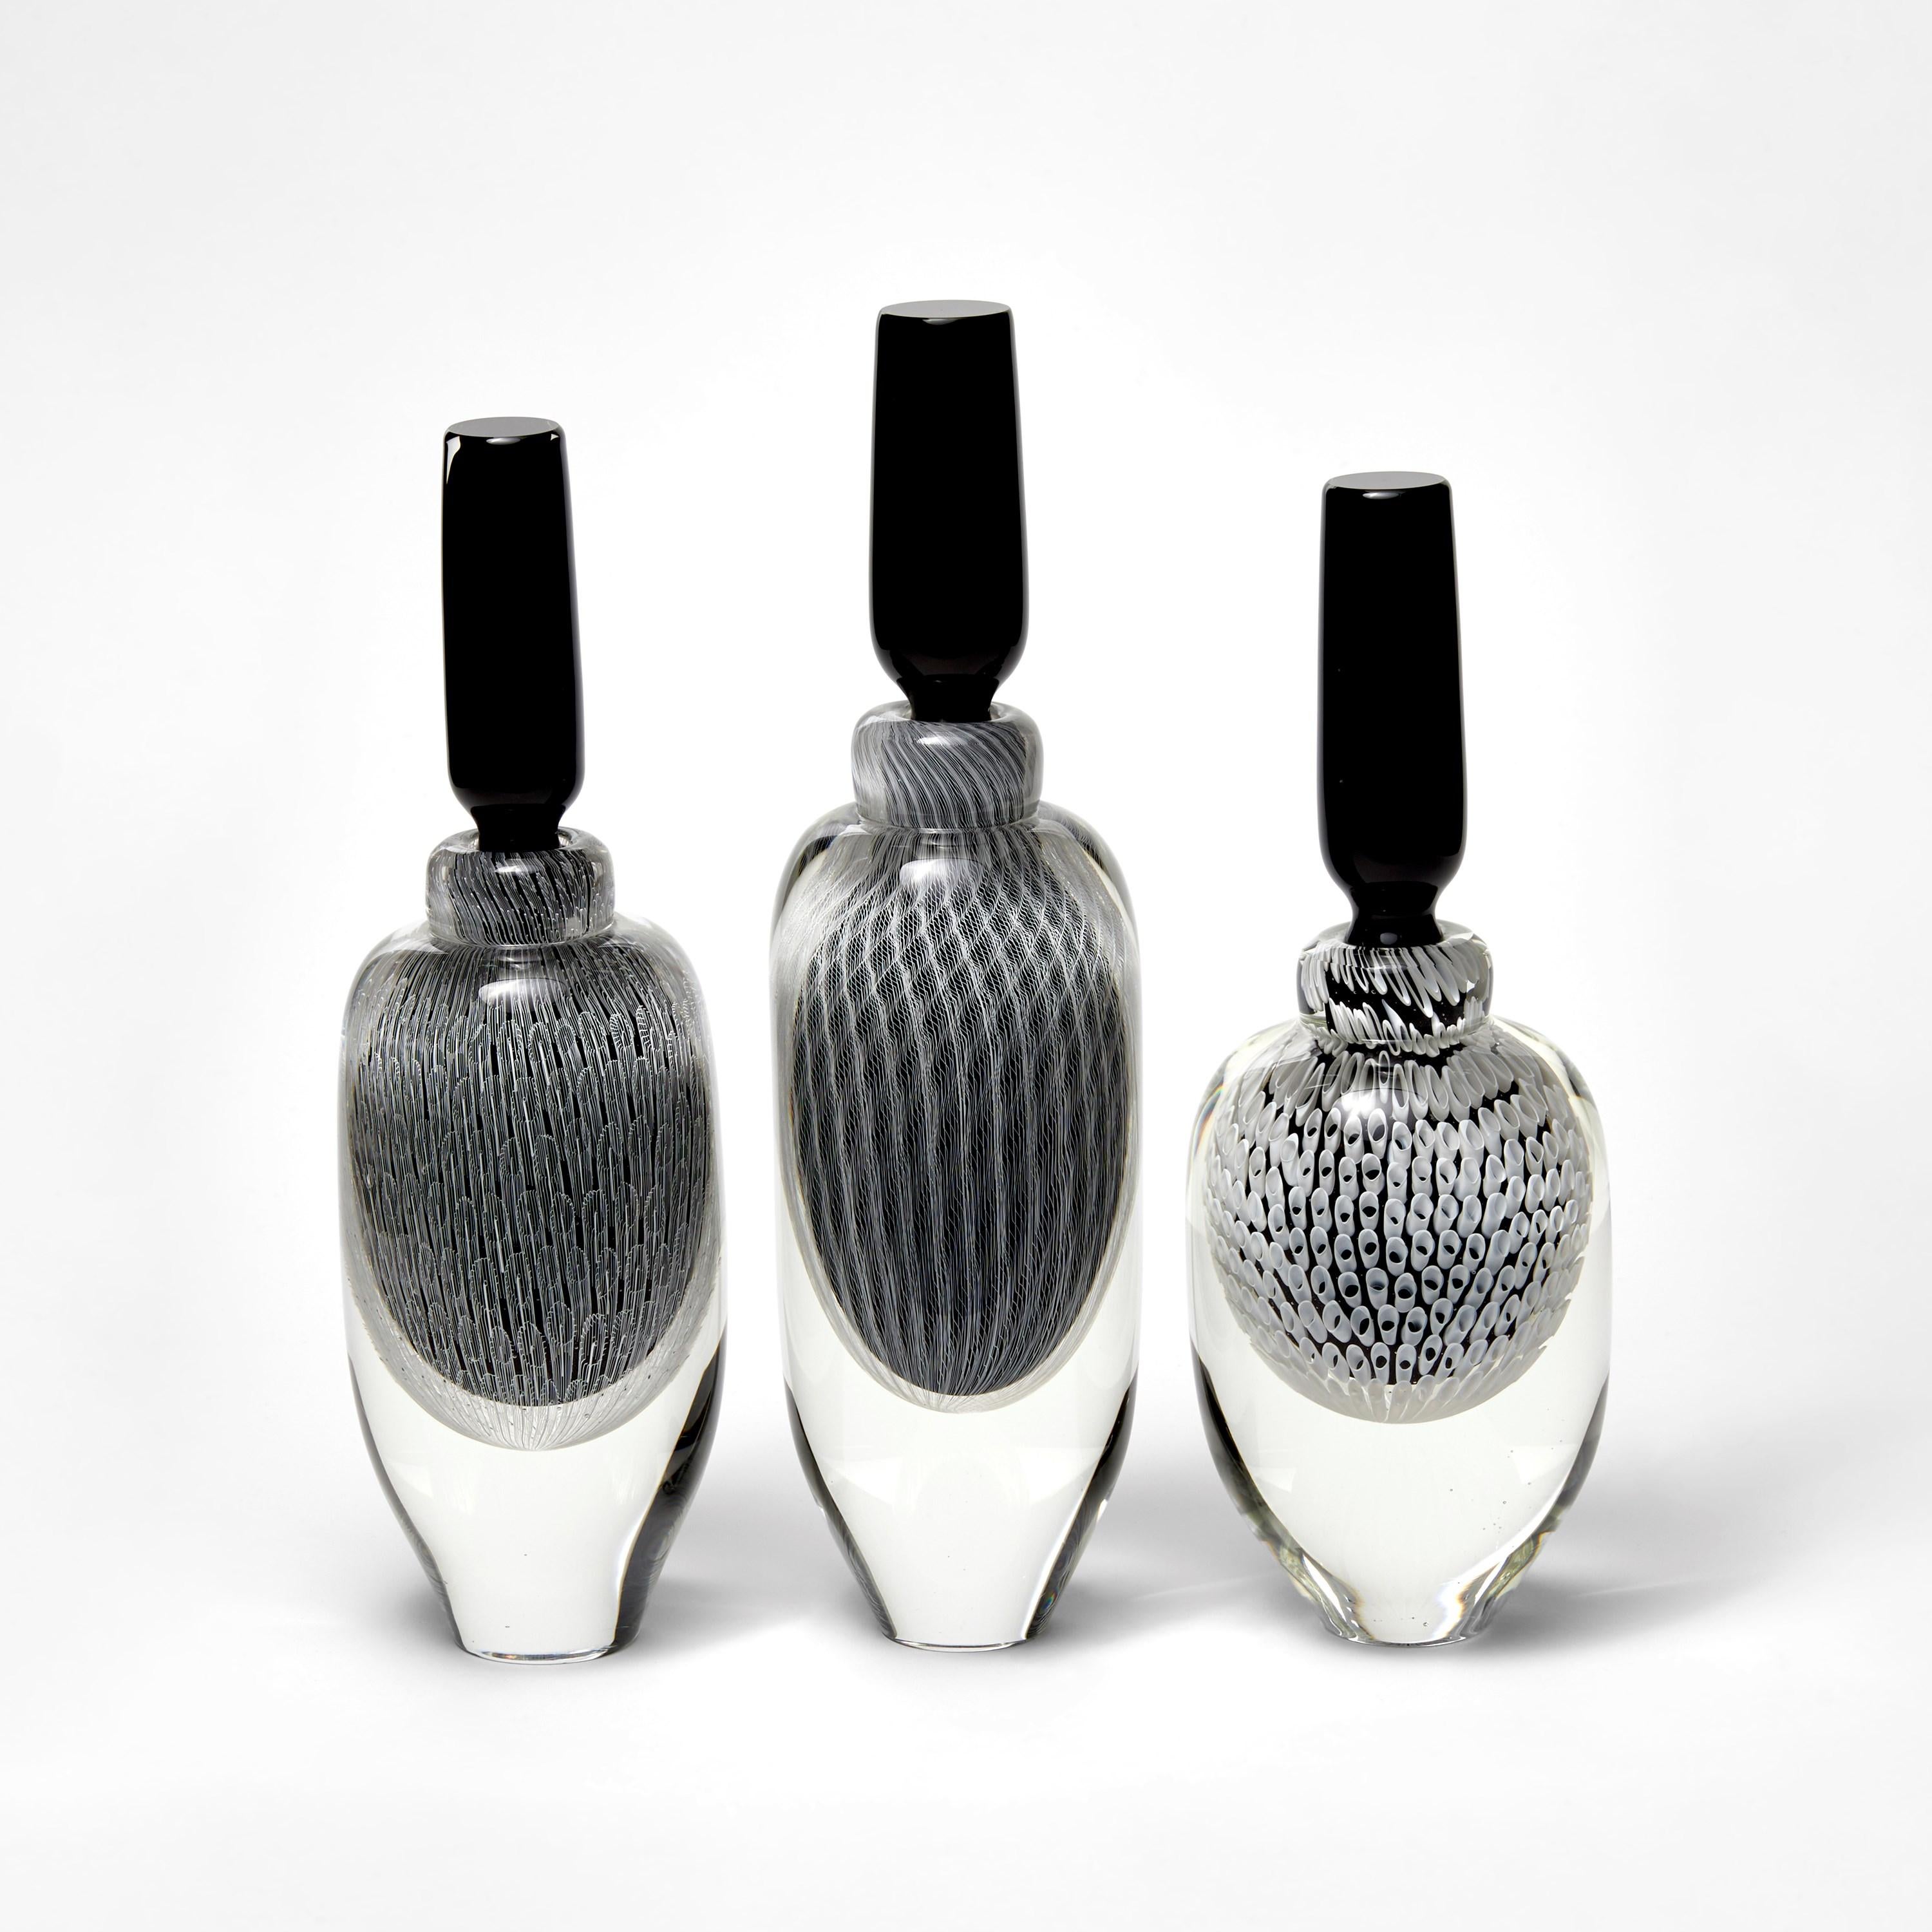 Australian Moire, a Black, White & Clear Large Sculptural Glass Bottle by Peter Bowles For Sale